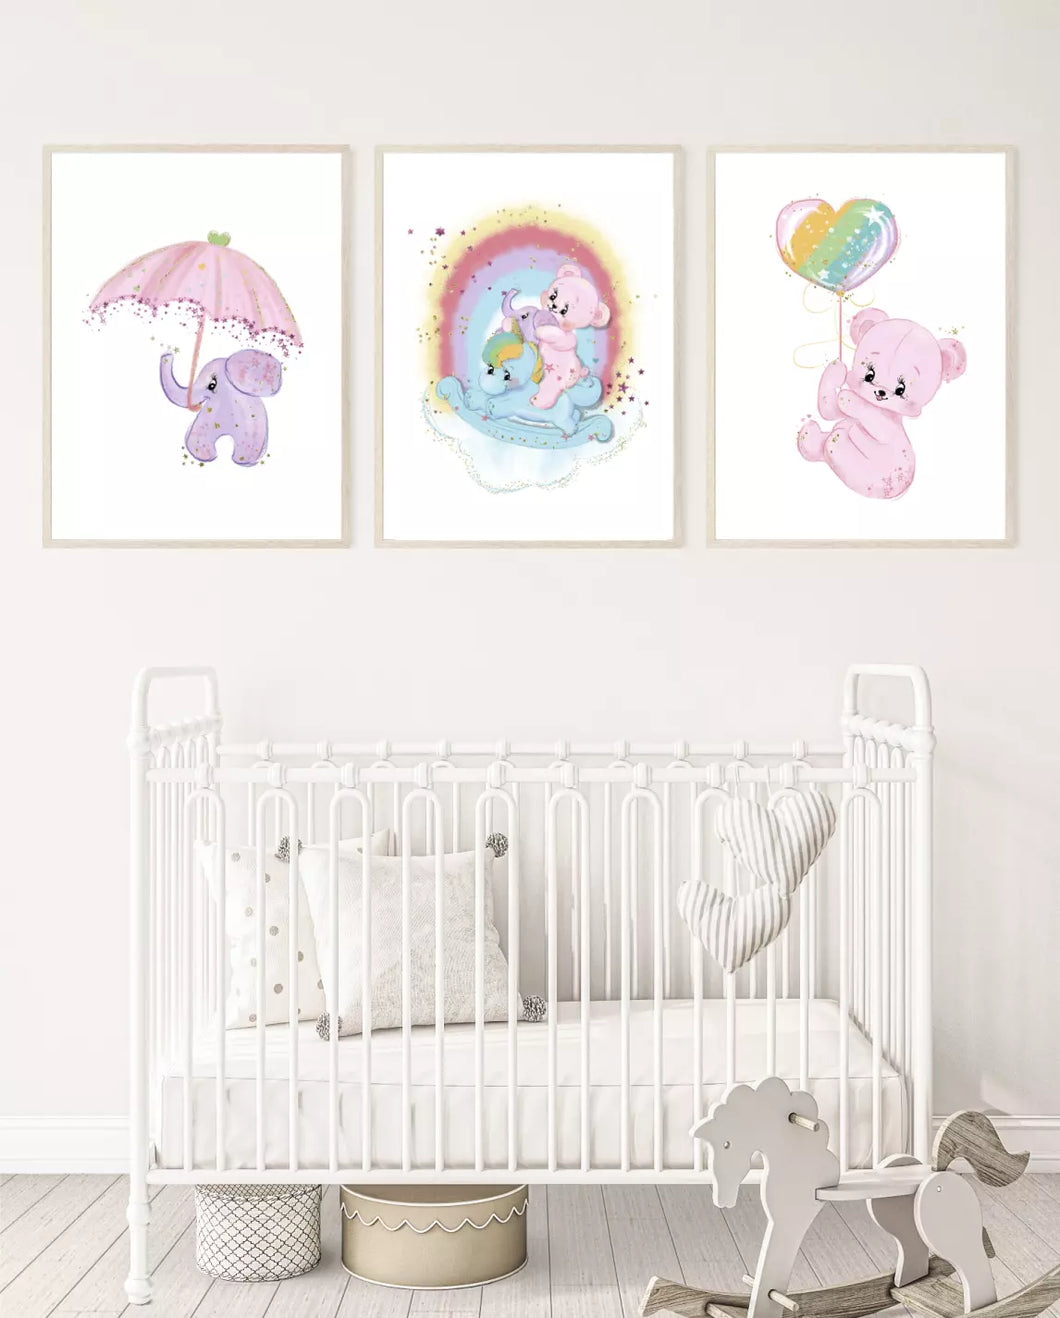 Colourful bears and elephants wall art, poster prints, pink bear, purple elephant, set of 3 prints, various sizes available